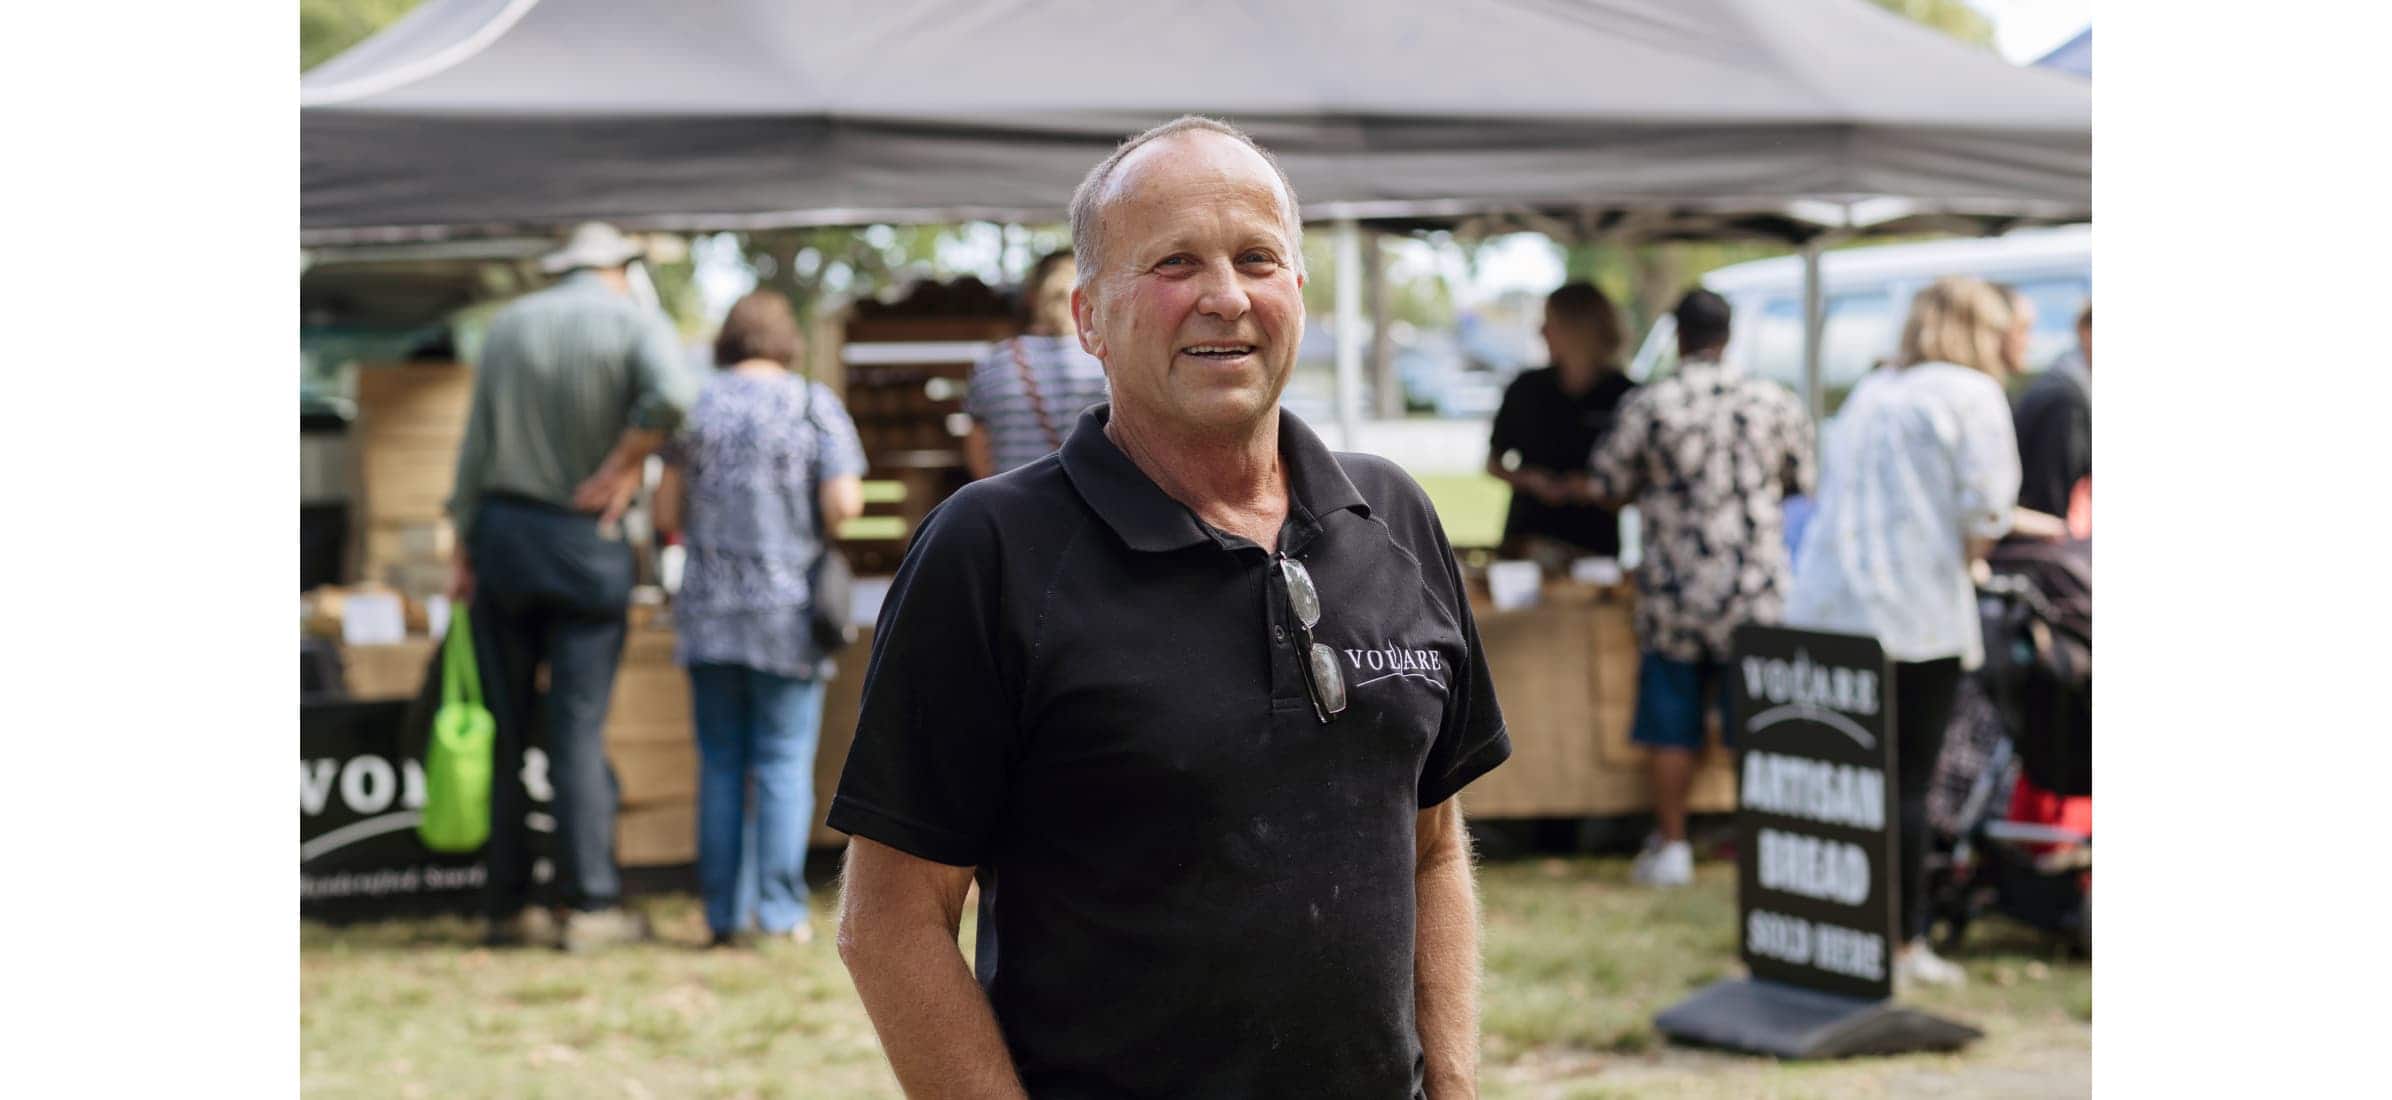 The father of Ryan, one of the founders of Volare bakery, at a farmers market.